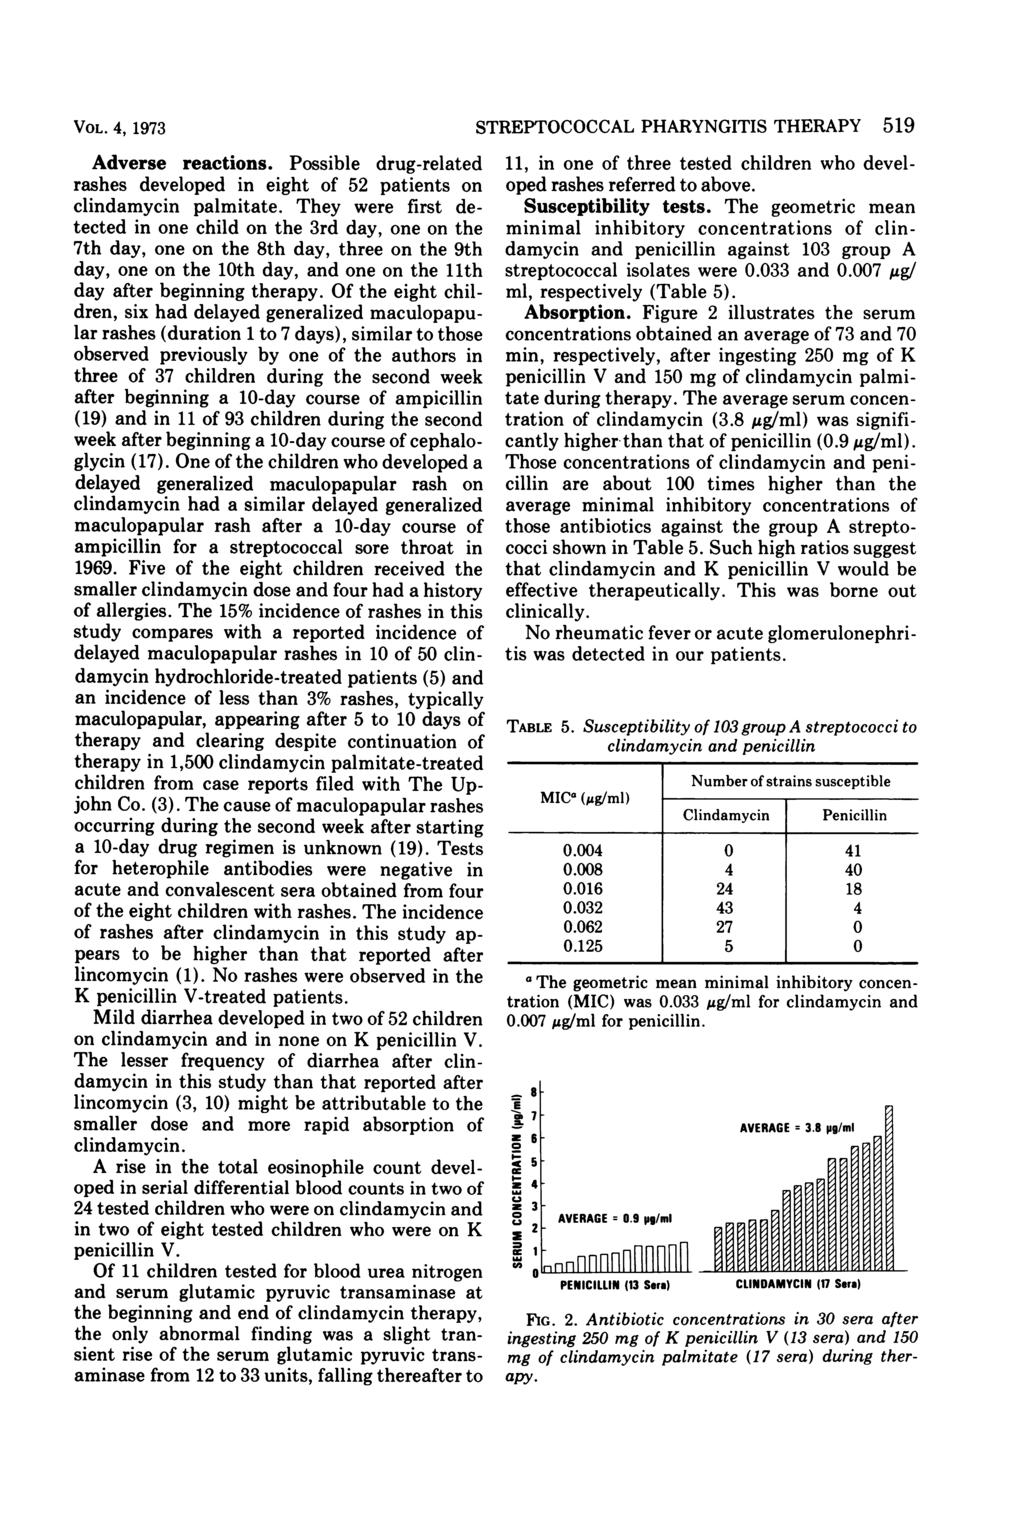 VOL. 4, 1973 Adverse reactions. Possible drug-related rashes developed in eight of 52 patients on clindamycin palmitate.